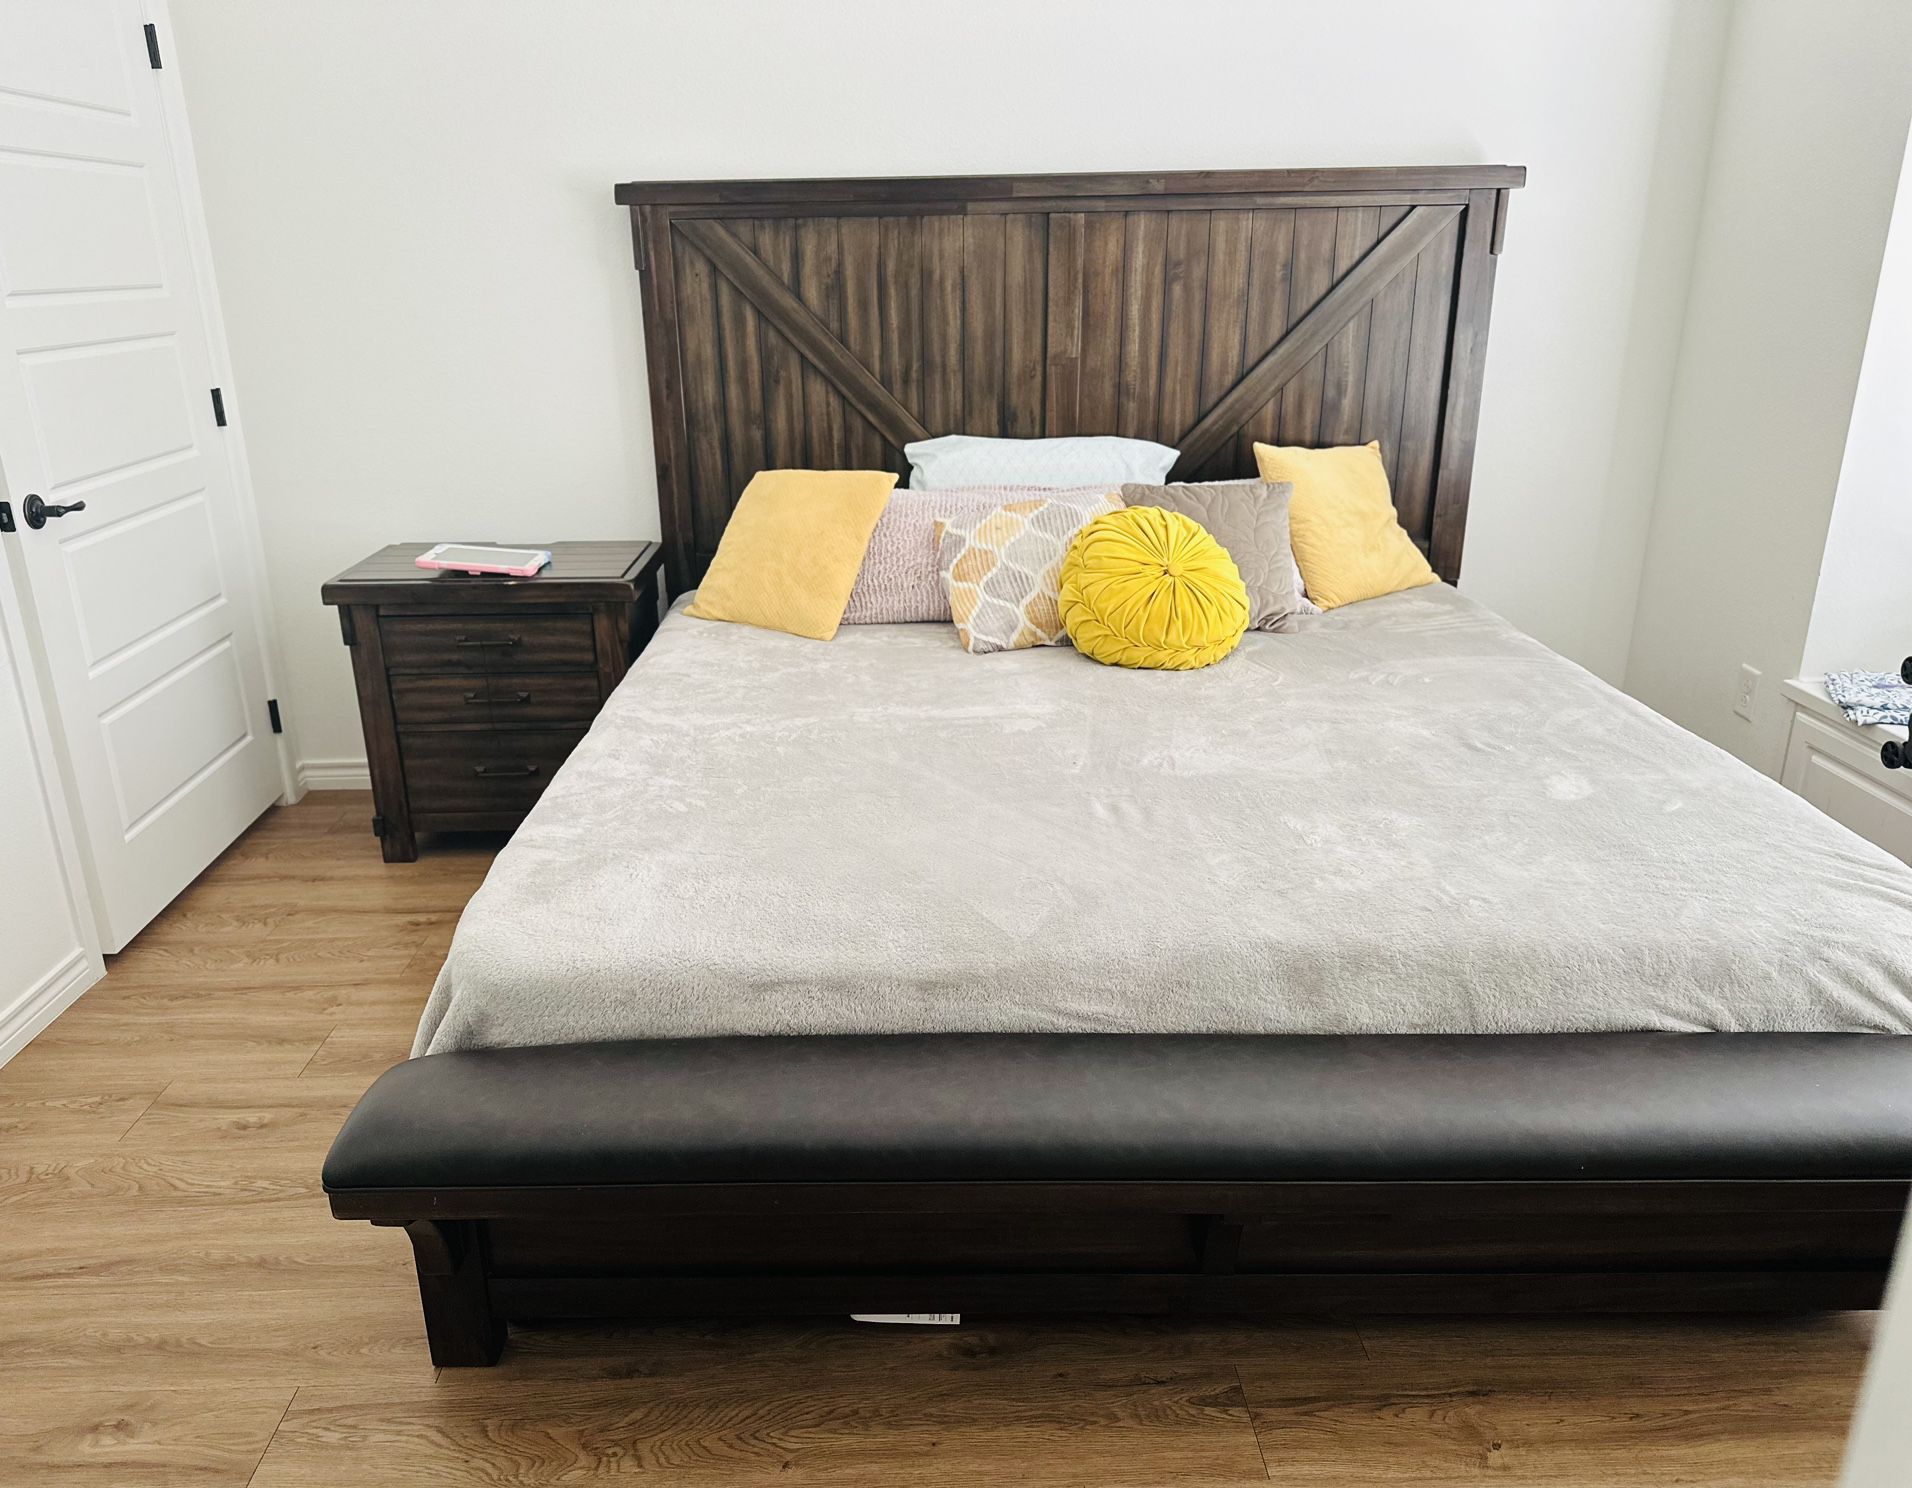 King Bed and Nightstand 